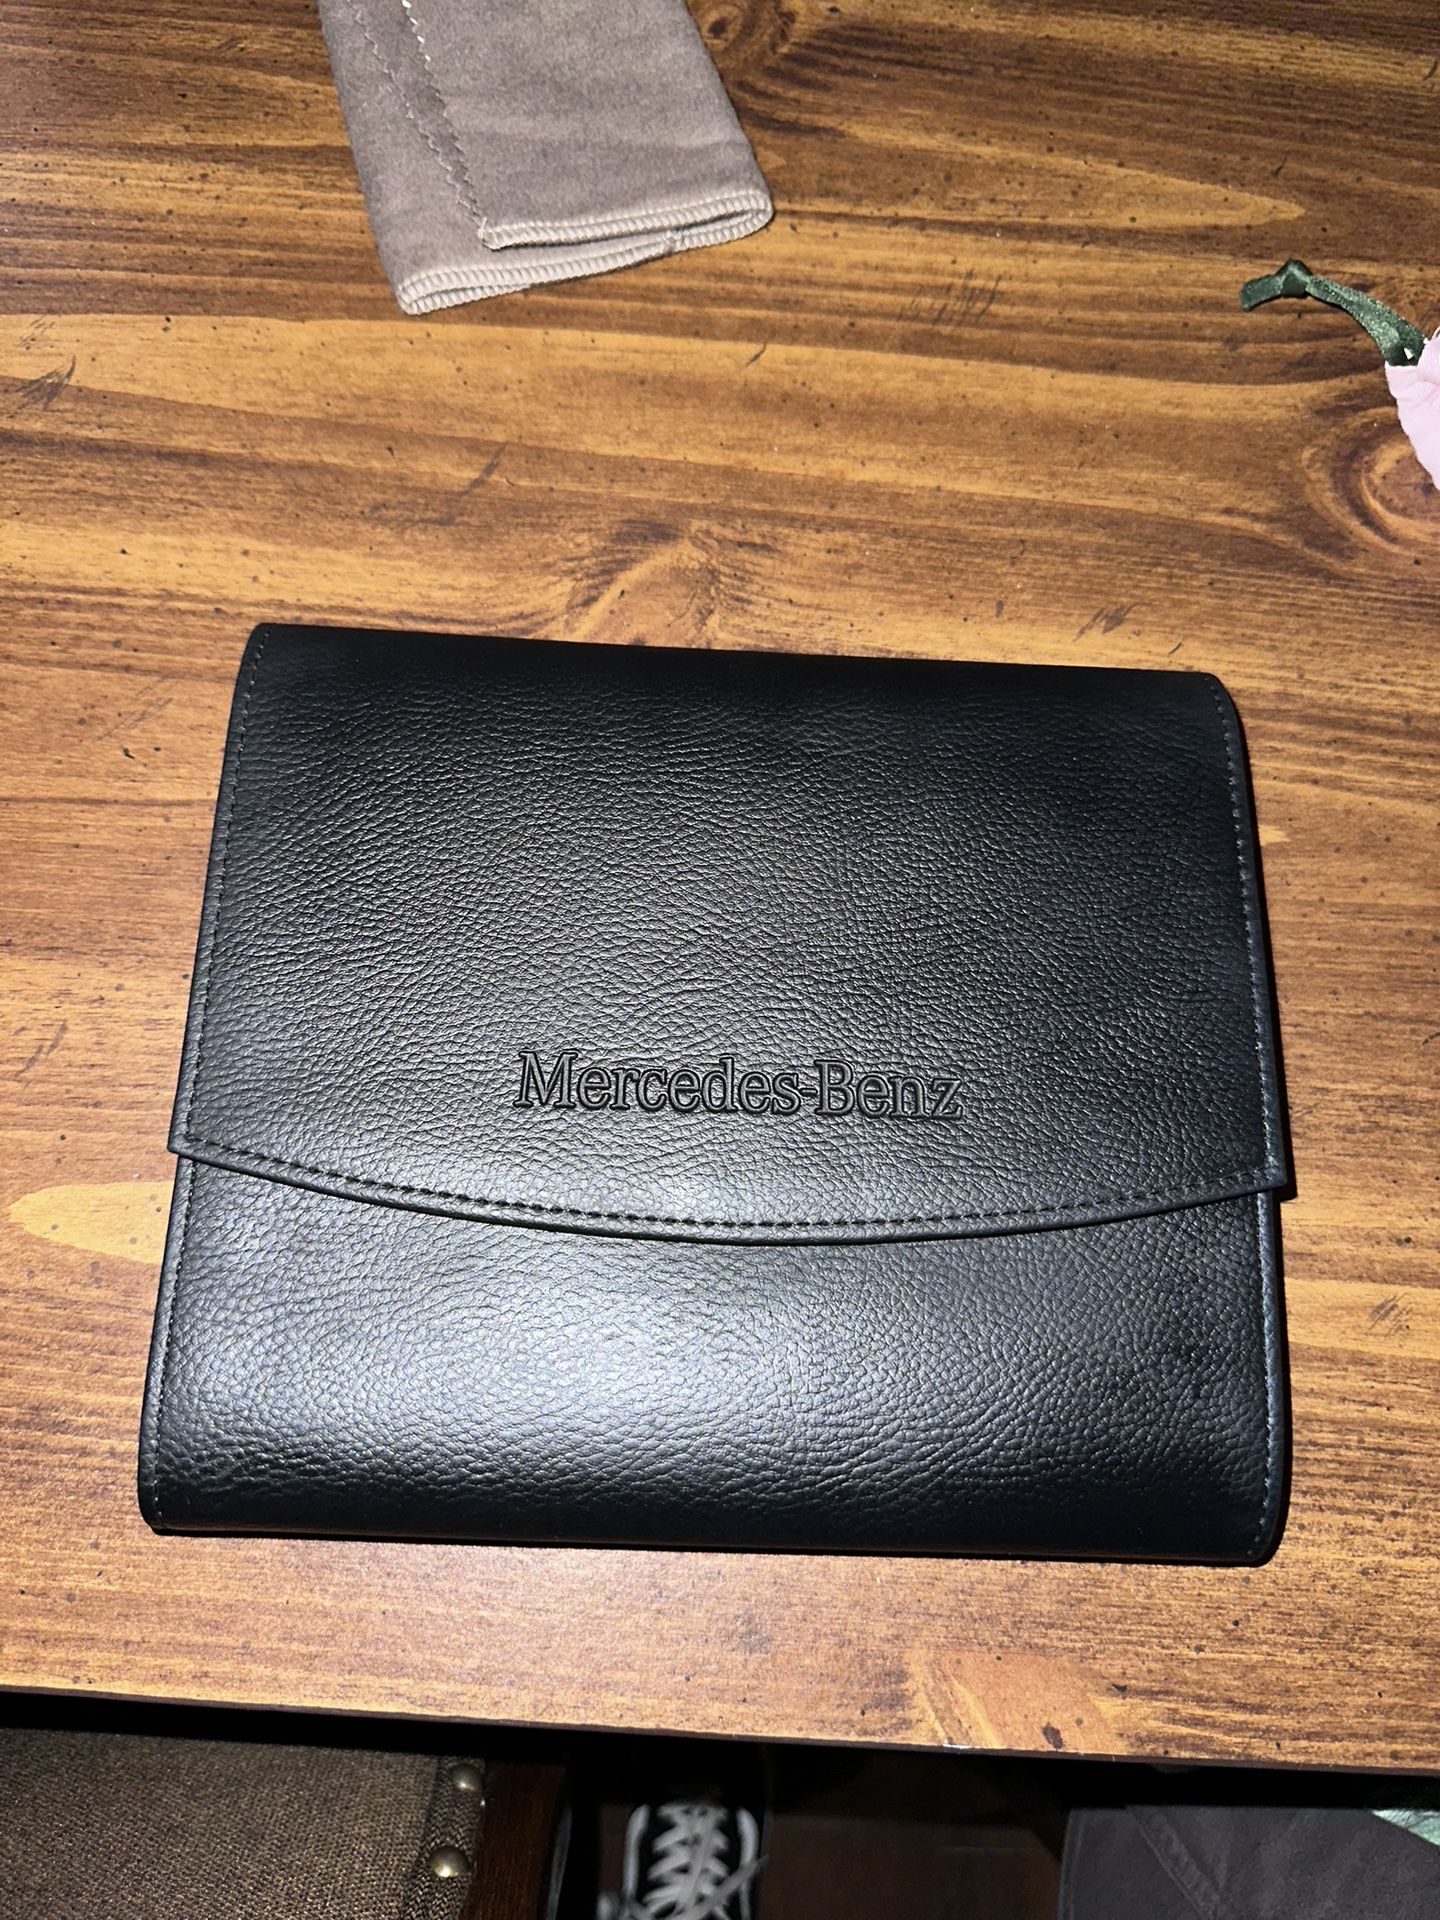 Mercedes Benz Leather Document Holder for Sale in Dallas, TX - OfferUp